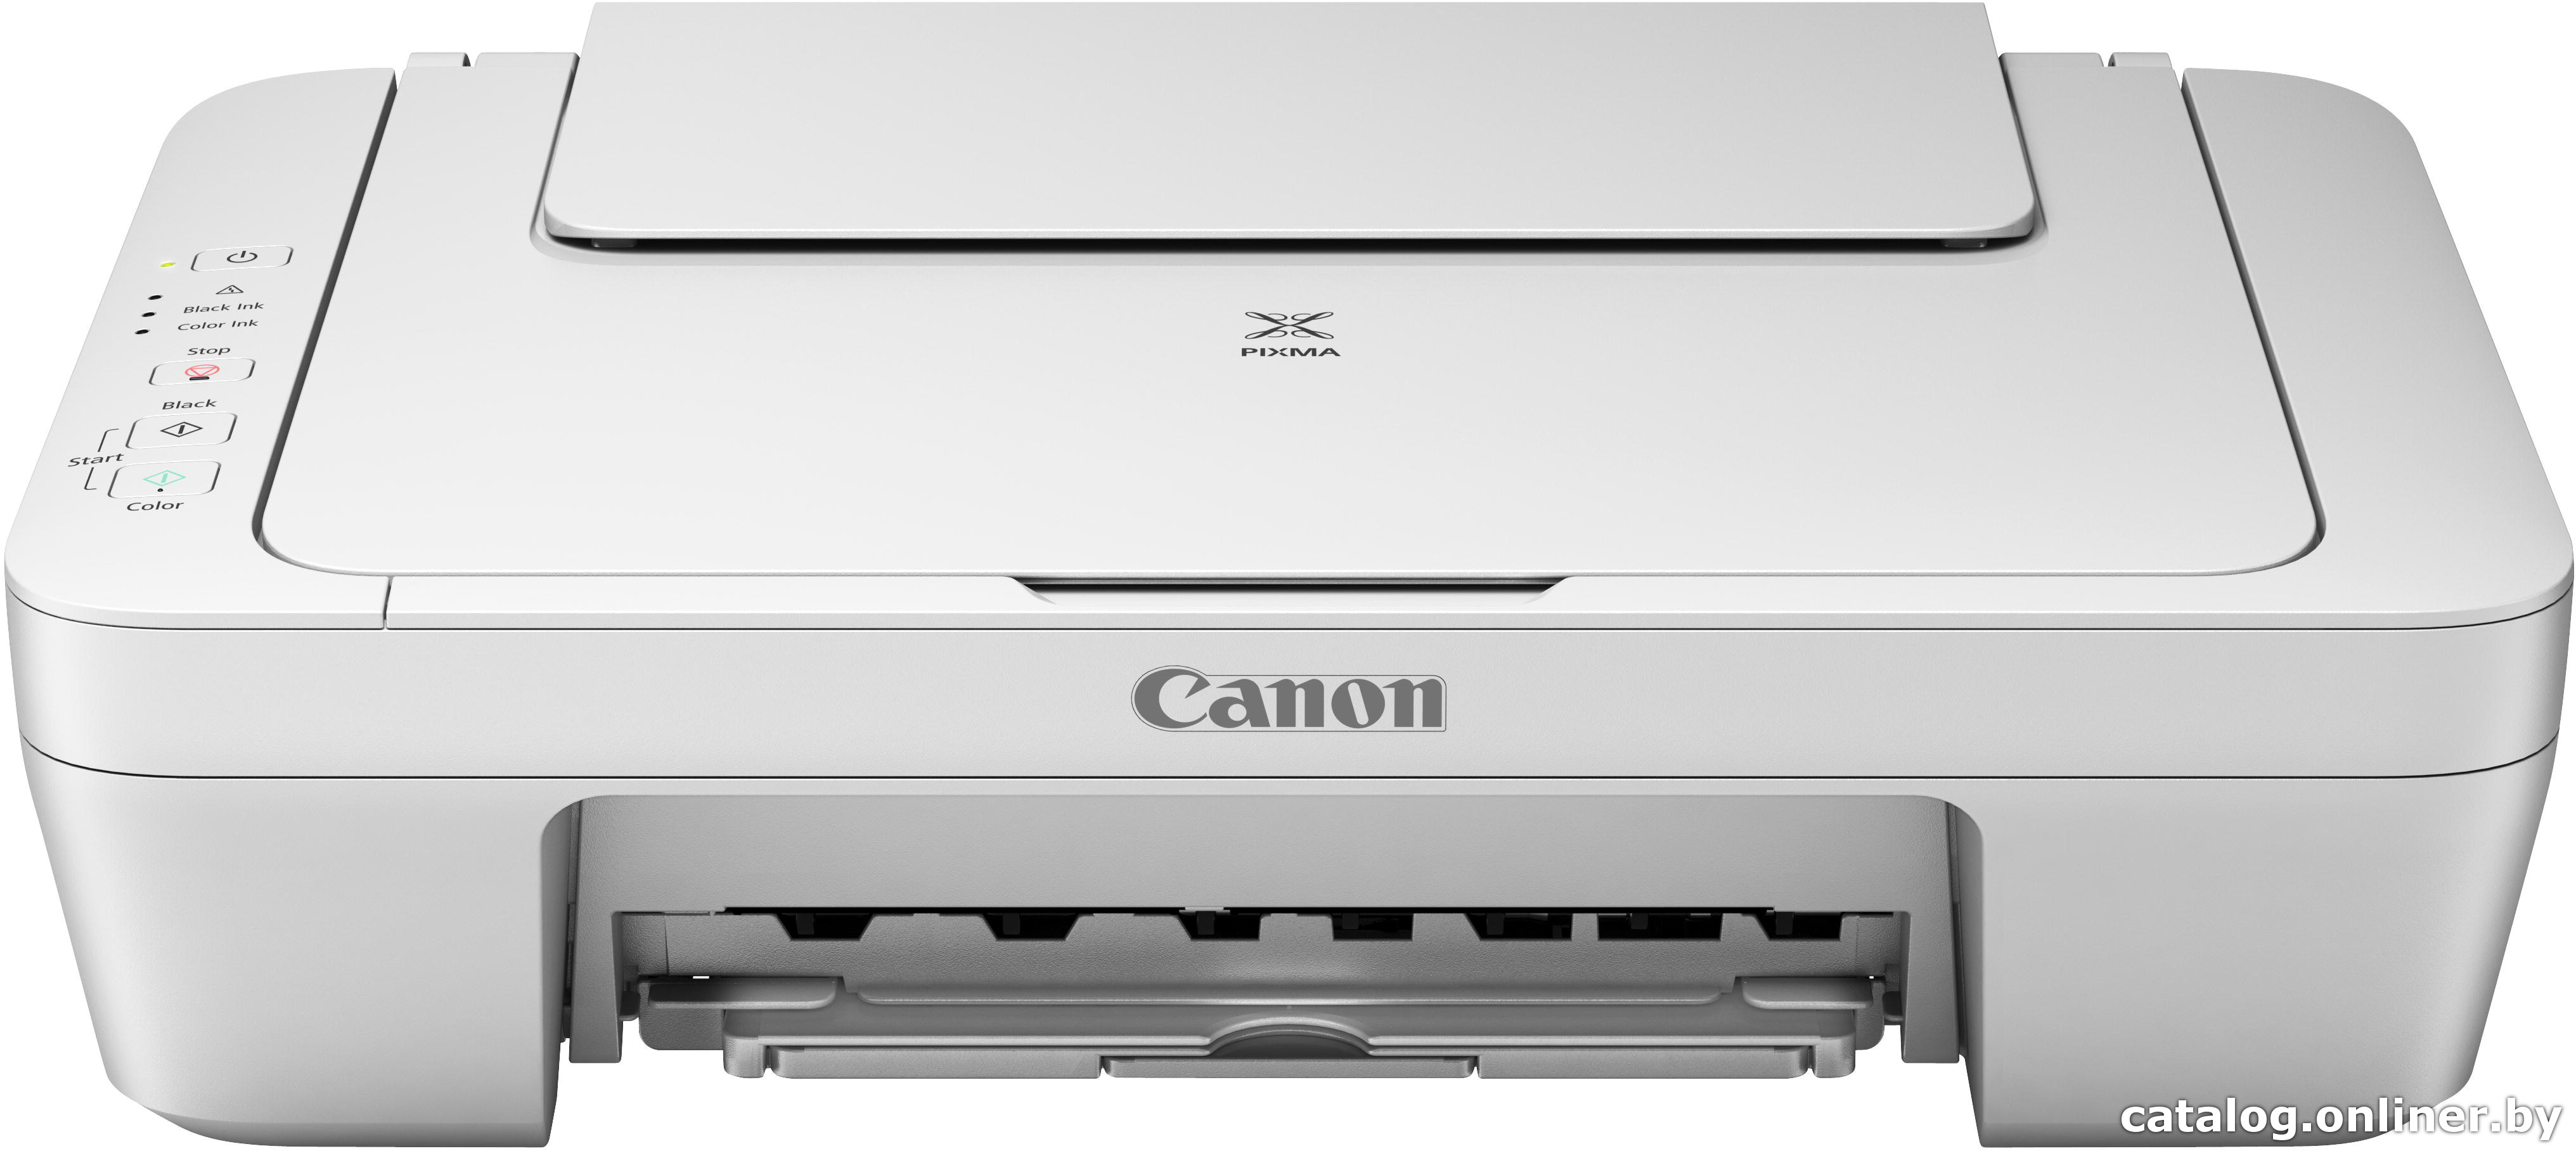 Canon MG2545S Scanner Driver Mac High Sierra 10.13 How to Download and Install - Featured